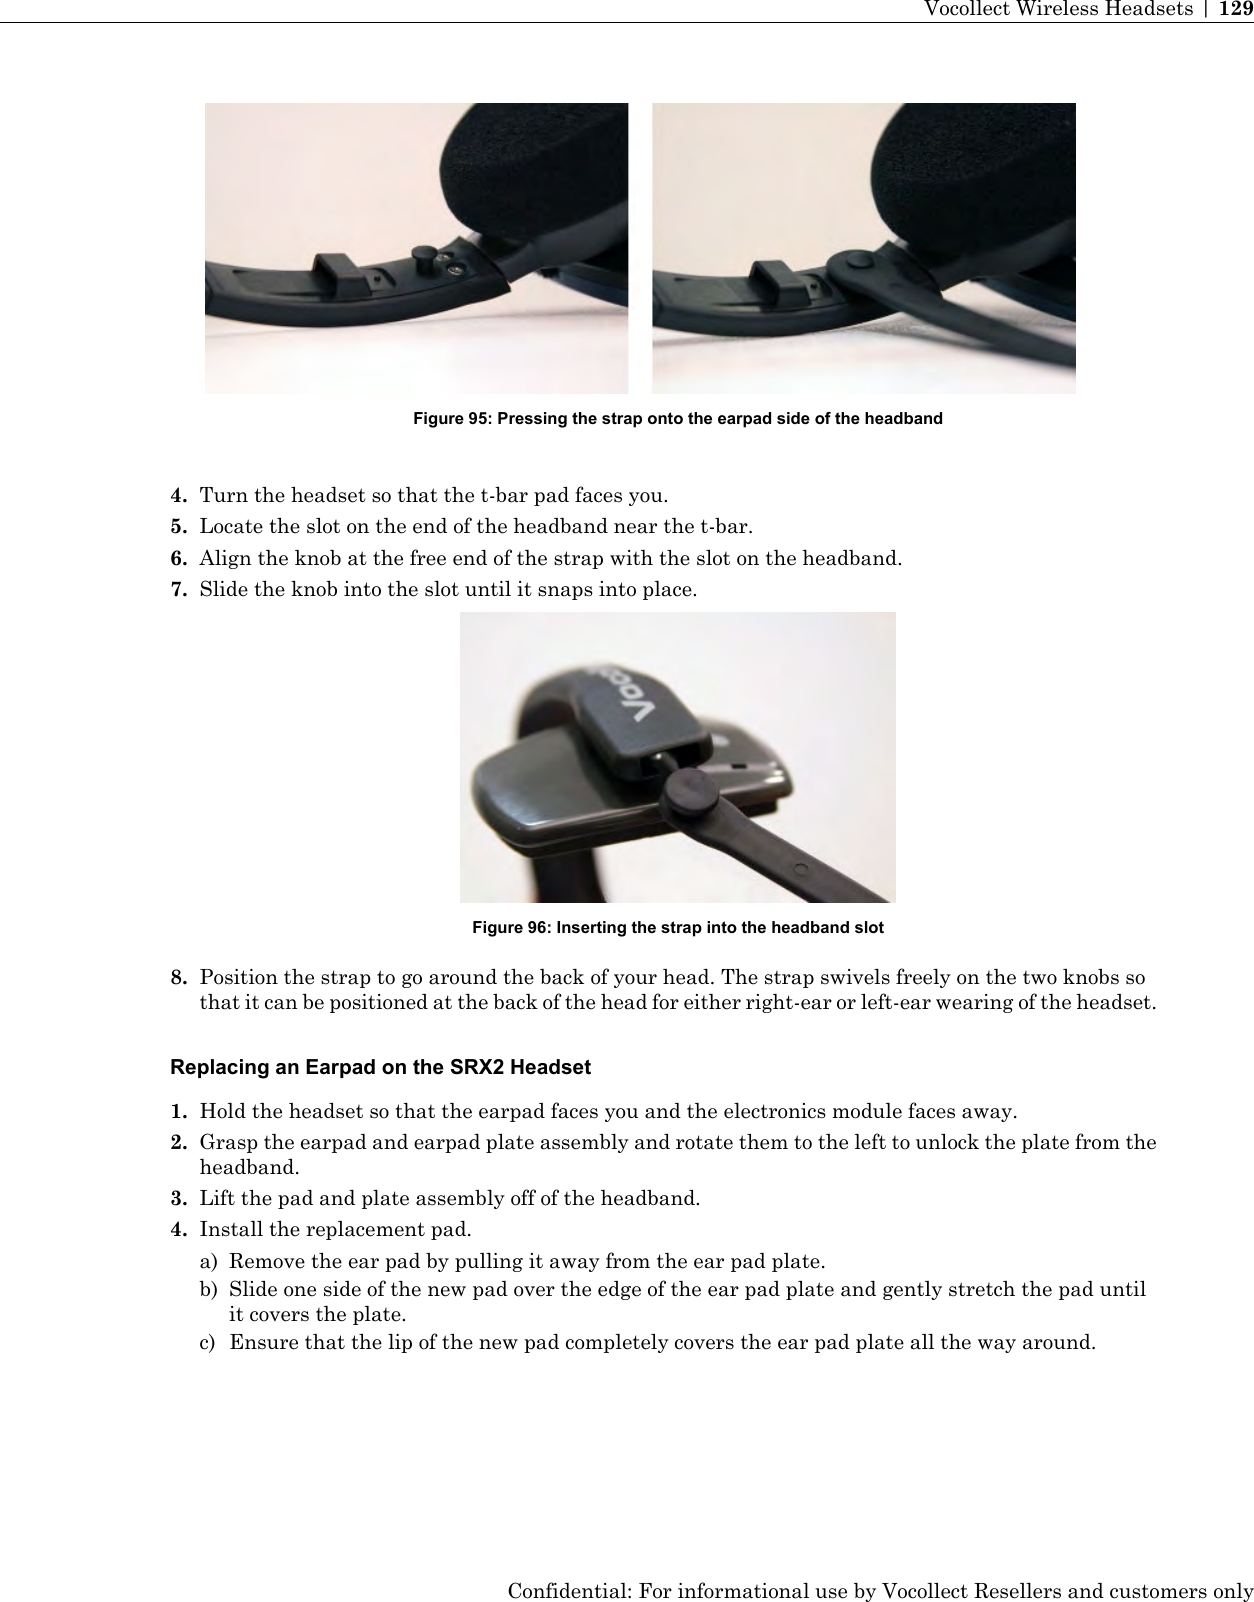 Figure 95: Pressing the strap onto the earpad side of the headband4. Turn the headset so that the t-bar pad faces you.5. Locate the slot on the end of the headband near the t-bar.6. Align the knob at the free end of the strap with the slot on the headband.7. Slide the knob into the slot until it snaps into place.Figure 96: Inserting the strap into the headband slot8. Position the strap to go around the back of your head. The strap swivels freely on the two knobs sothat it can be positioned at the back of the head for either right-ear or left-ear wearing of the headset.Replacing an Earpad on the SRX2 Headset1. Hold the headset so that the earpad faces you and the electronics module faces away.2. Grasp the earpad and earpad plate assembly and rotate them to the left to unlock the plate from theheadband.3. Lift the pad and plate assembly off of the headband.4. Install the replacement pad.a) Remove the ear pad by pulling it away from the ear pad plate.b) Slide one side of the new pad over the edge of the ear pad plate and gently stretch the pad untilit covers the plate.c) Ensure that the lip of the new pad completely covers the ear pad plate all the way around.Confidential: For informational use by Vocollect Resellers and customers onlyVocollect Wireless Headsets | 129